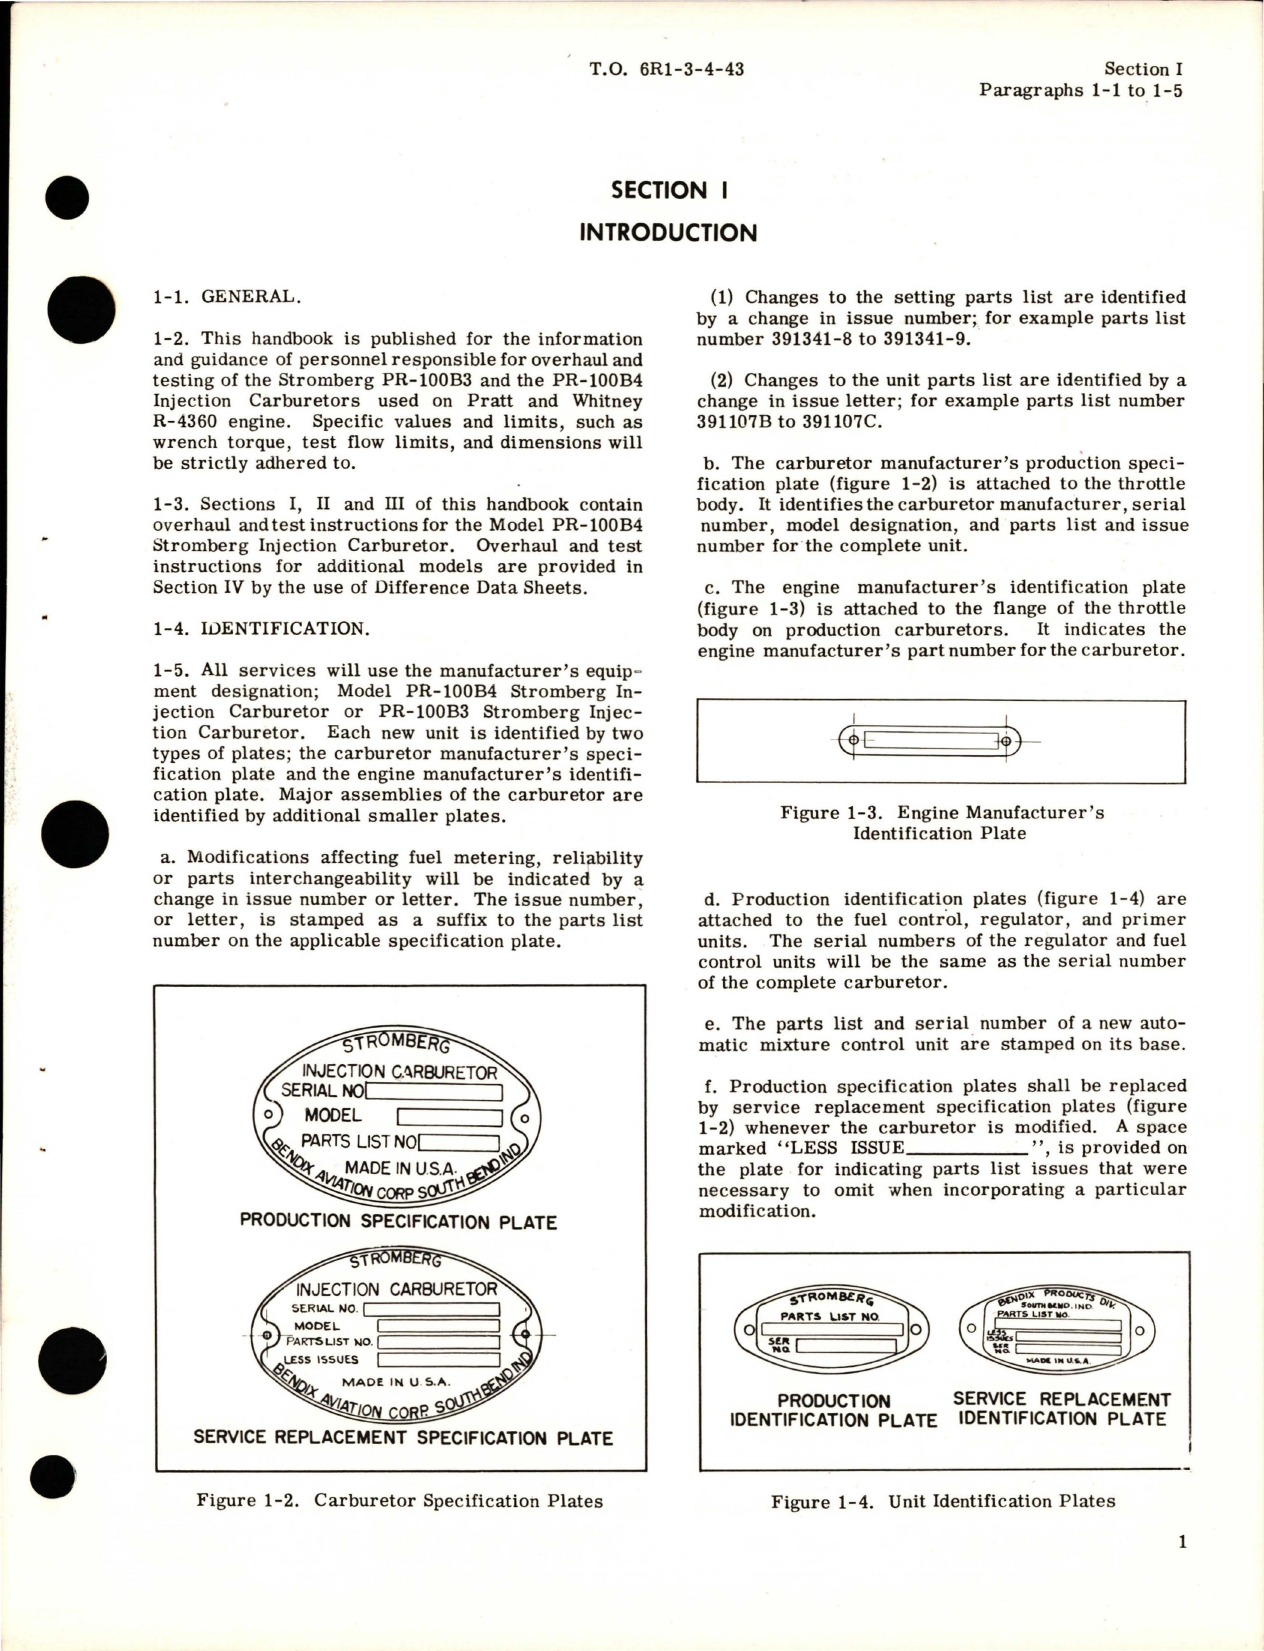 Sample page 5 from AirCorps Library document: Overhaul Instructions for Injection Carburetor - Model PR-100B3, PR-100B4  - Parts List 391081-12, 391082-12, 391341-9, and 391469-8